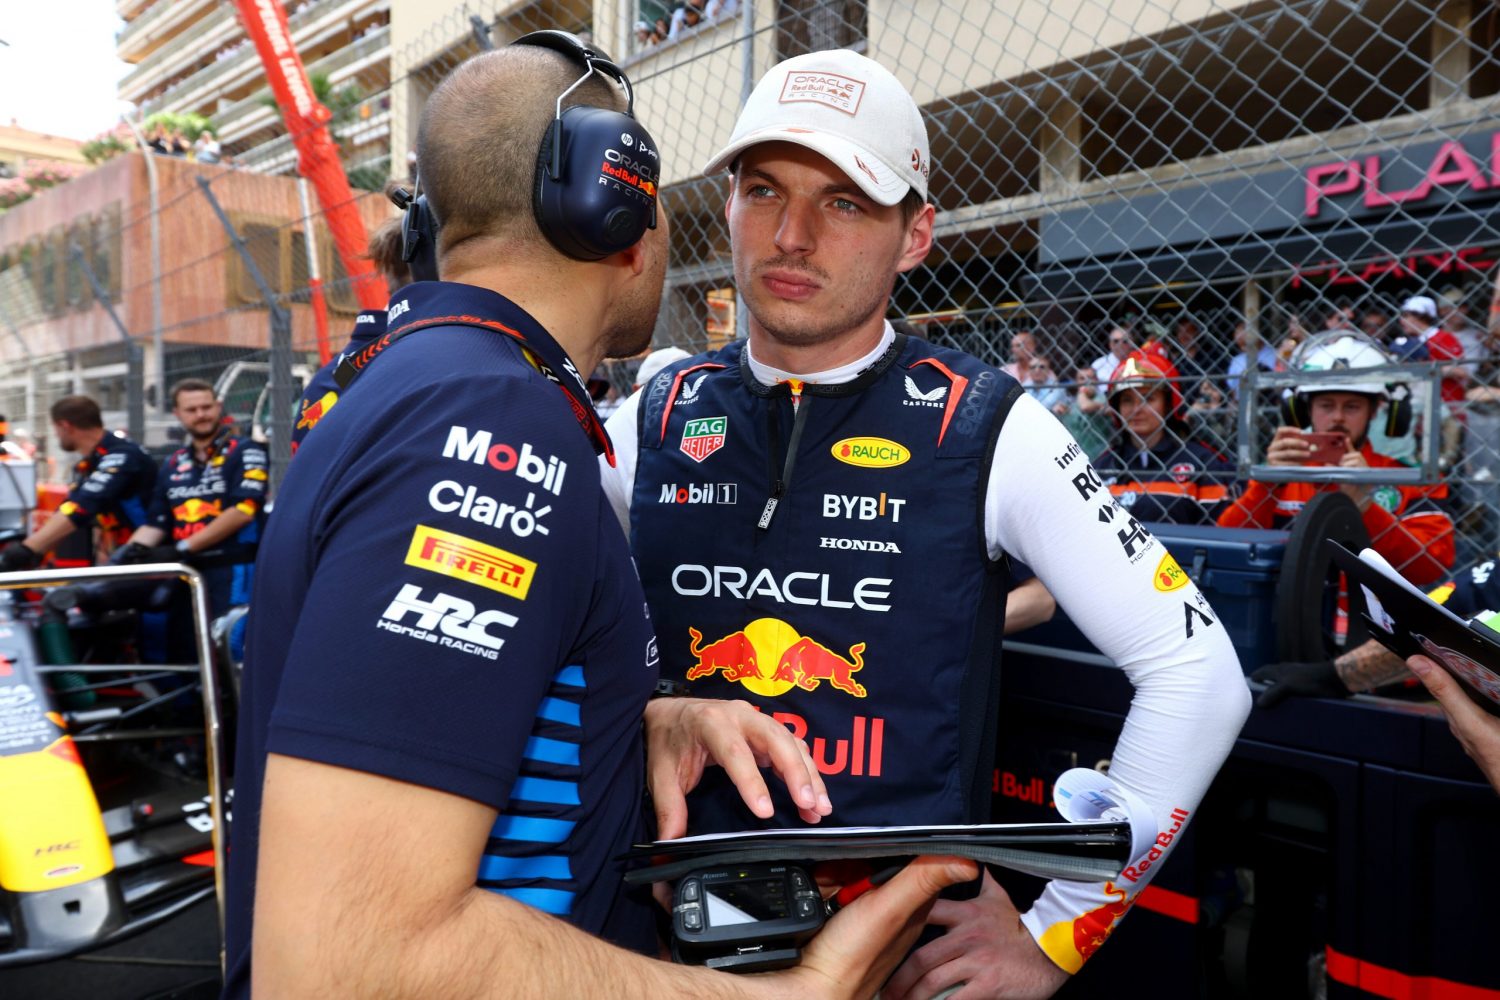 Verstappen ‘bored’ by Monaco procession that ‘wasn’t really racing’